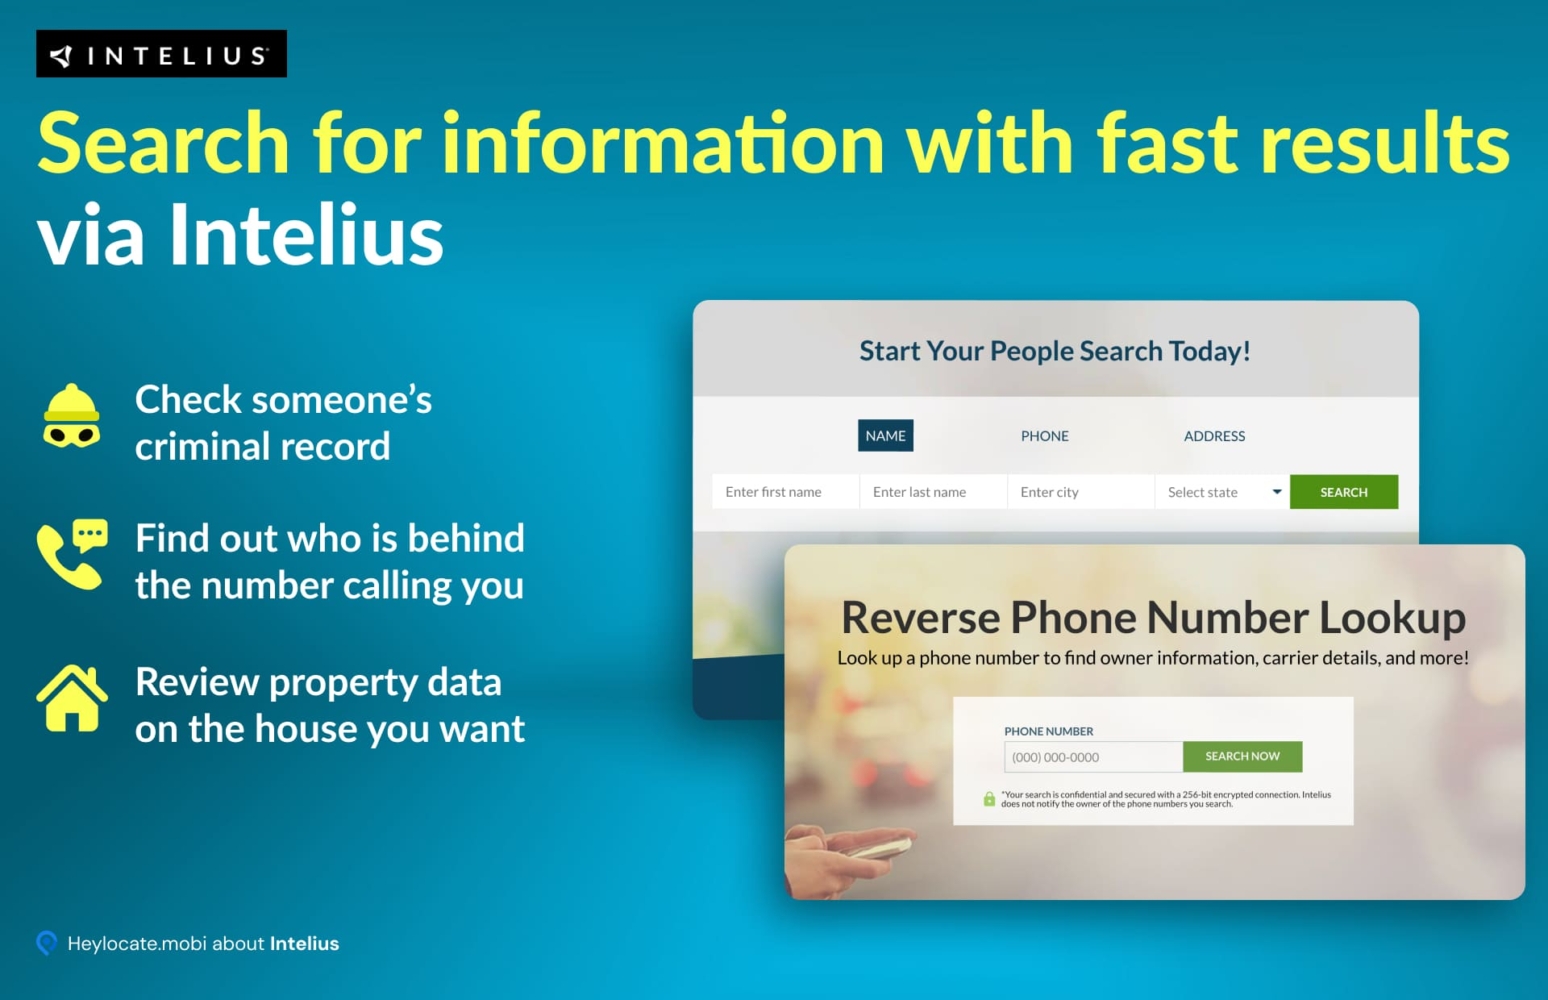 A graphic for Intelius, highlighting services such as checking criminal records, reverse phone number lookup, and reviewing property data, with a search interface inviting users to start their people search.